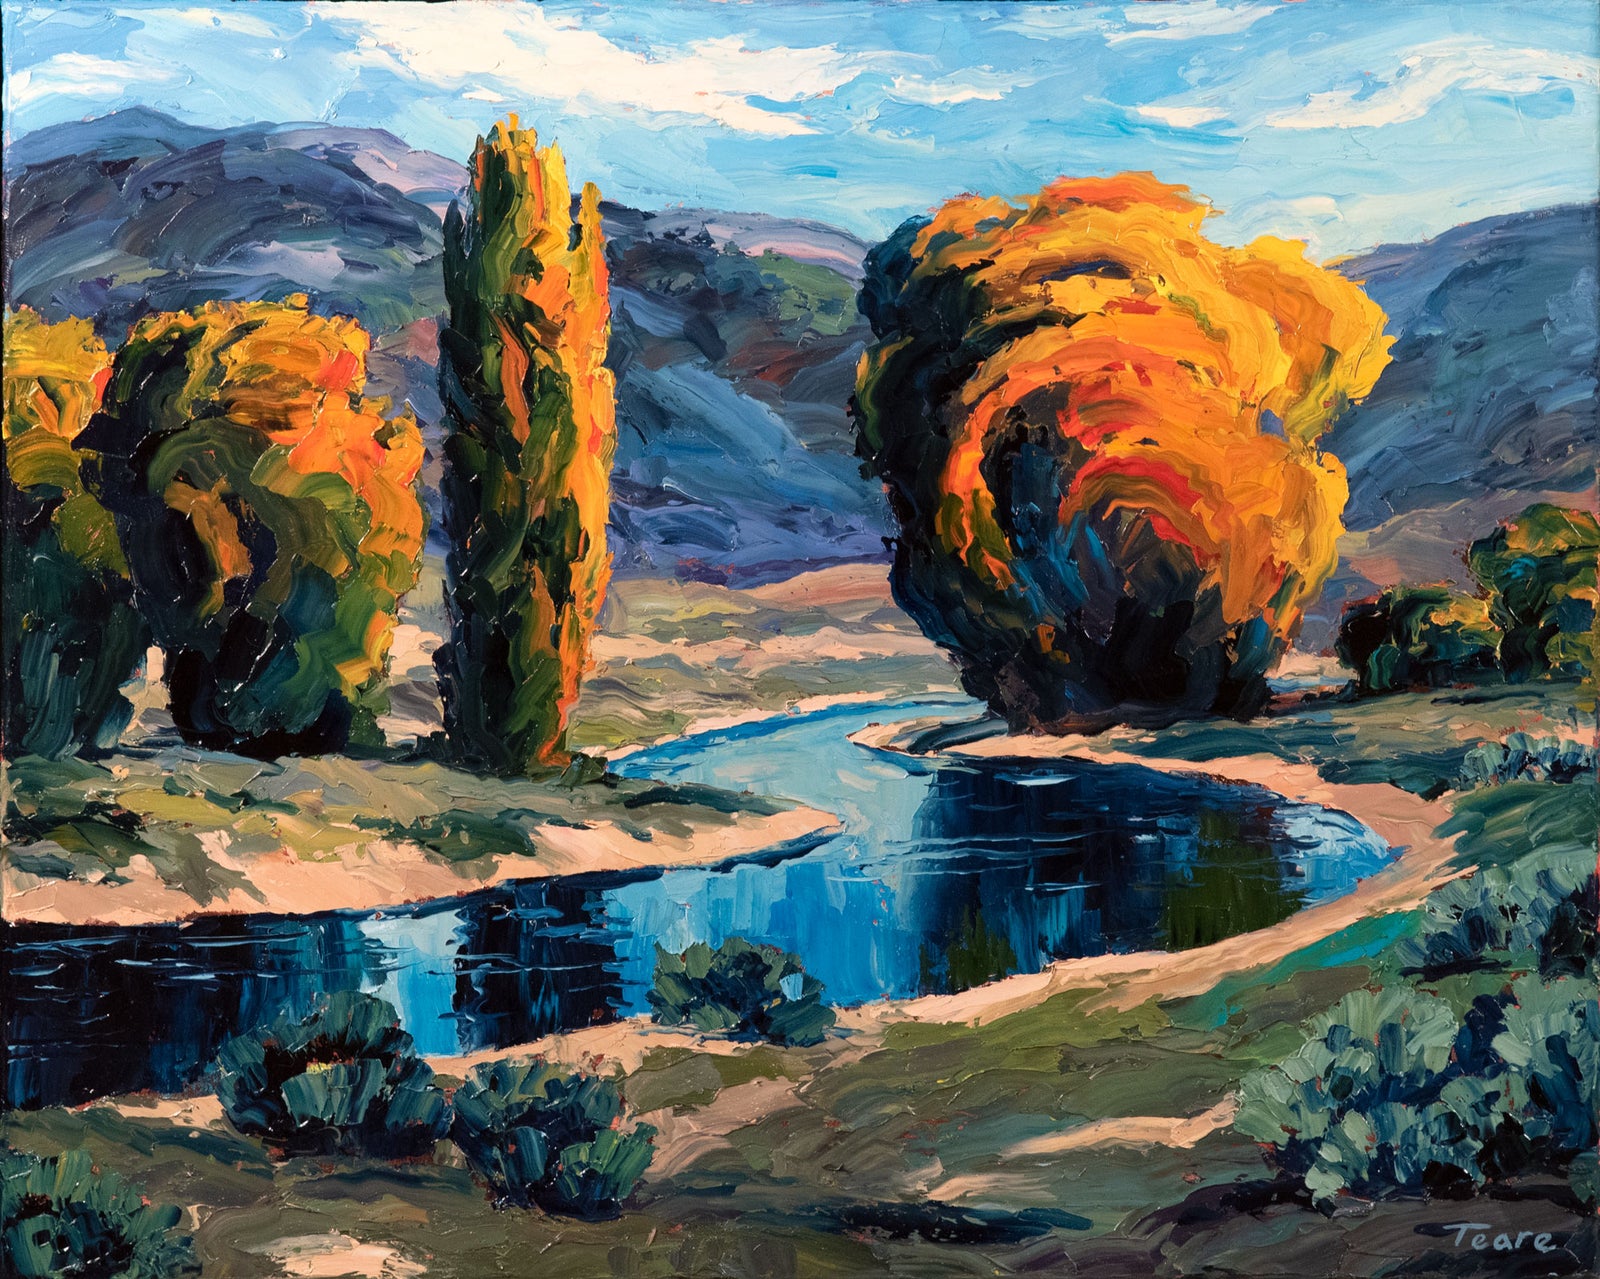 Brad Teare: Landscapes Made Like No Other